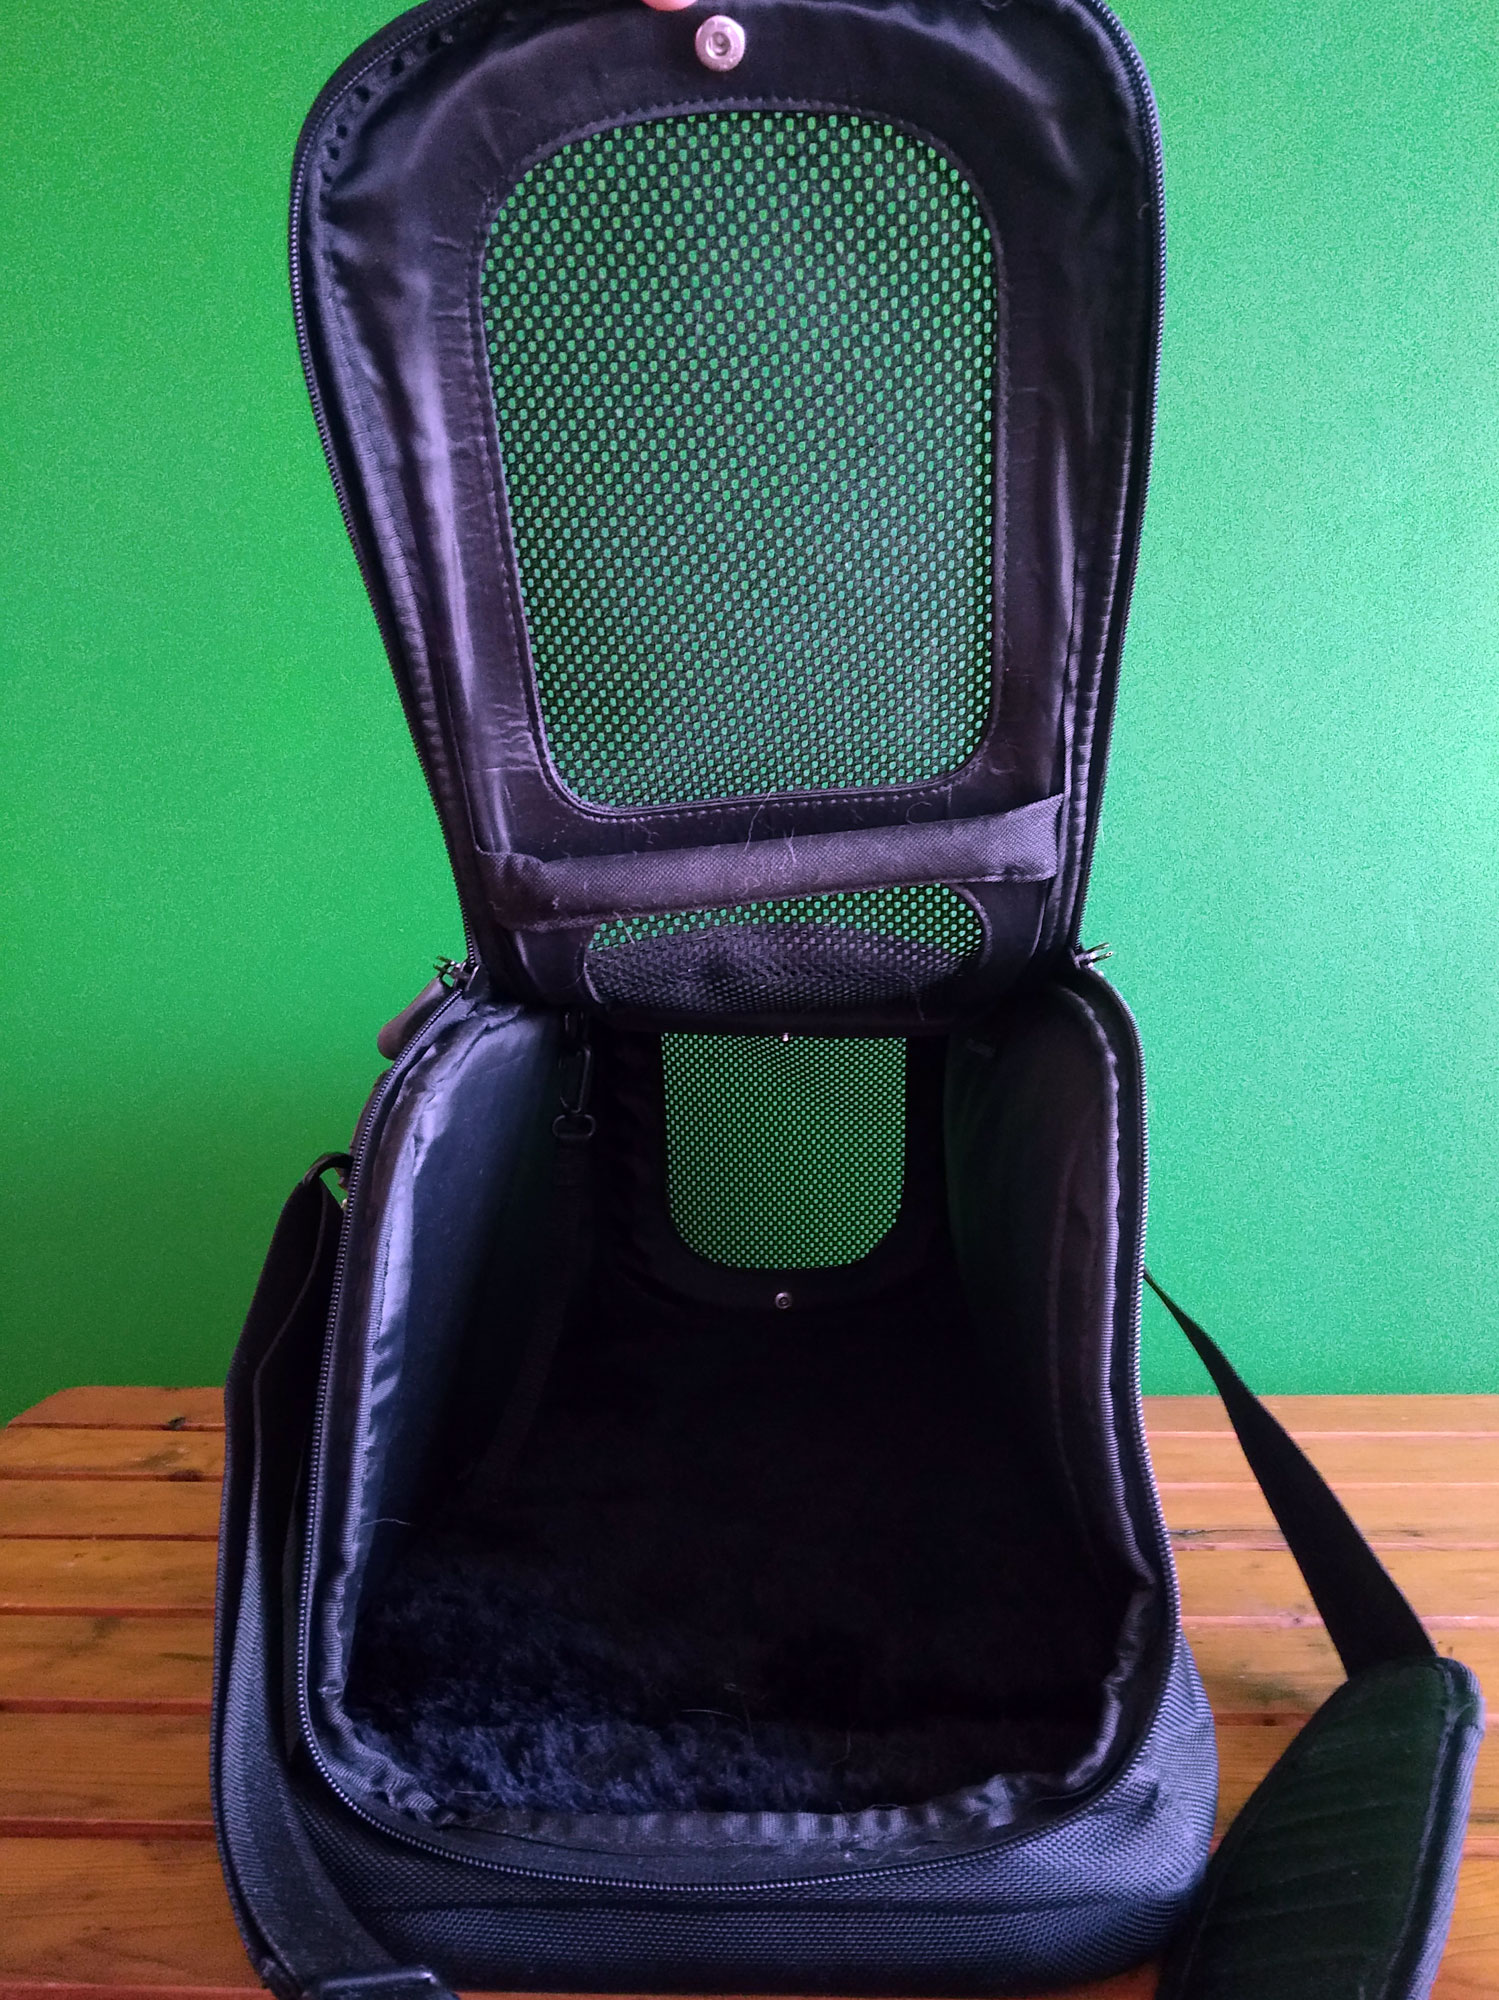 My black cat carrier with a sturdy strap and a big mesh window - perfect for flying.